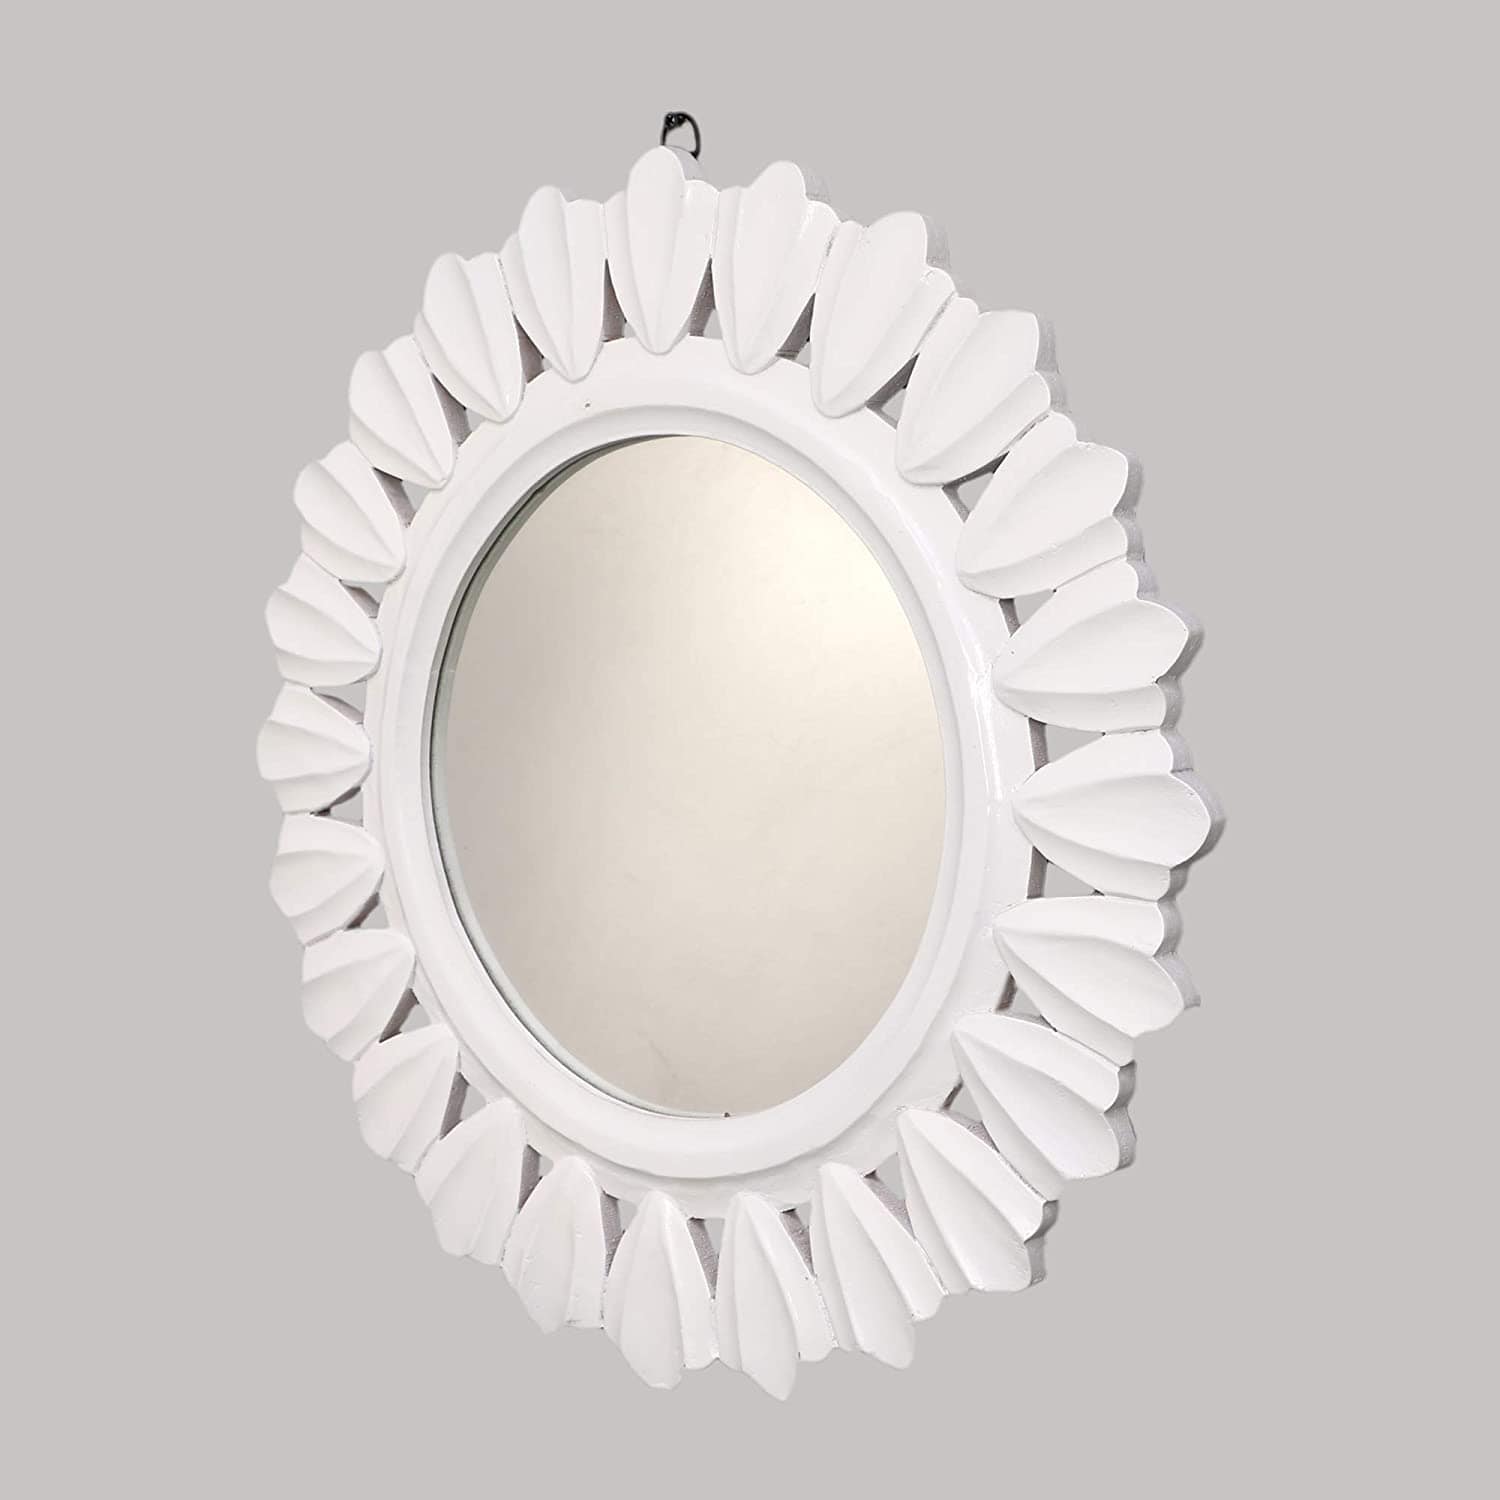 Decorative and Hand Crafted Wooden Wall Mirror in Duco White Finish - 20” x 20"